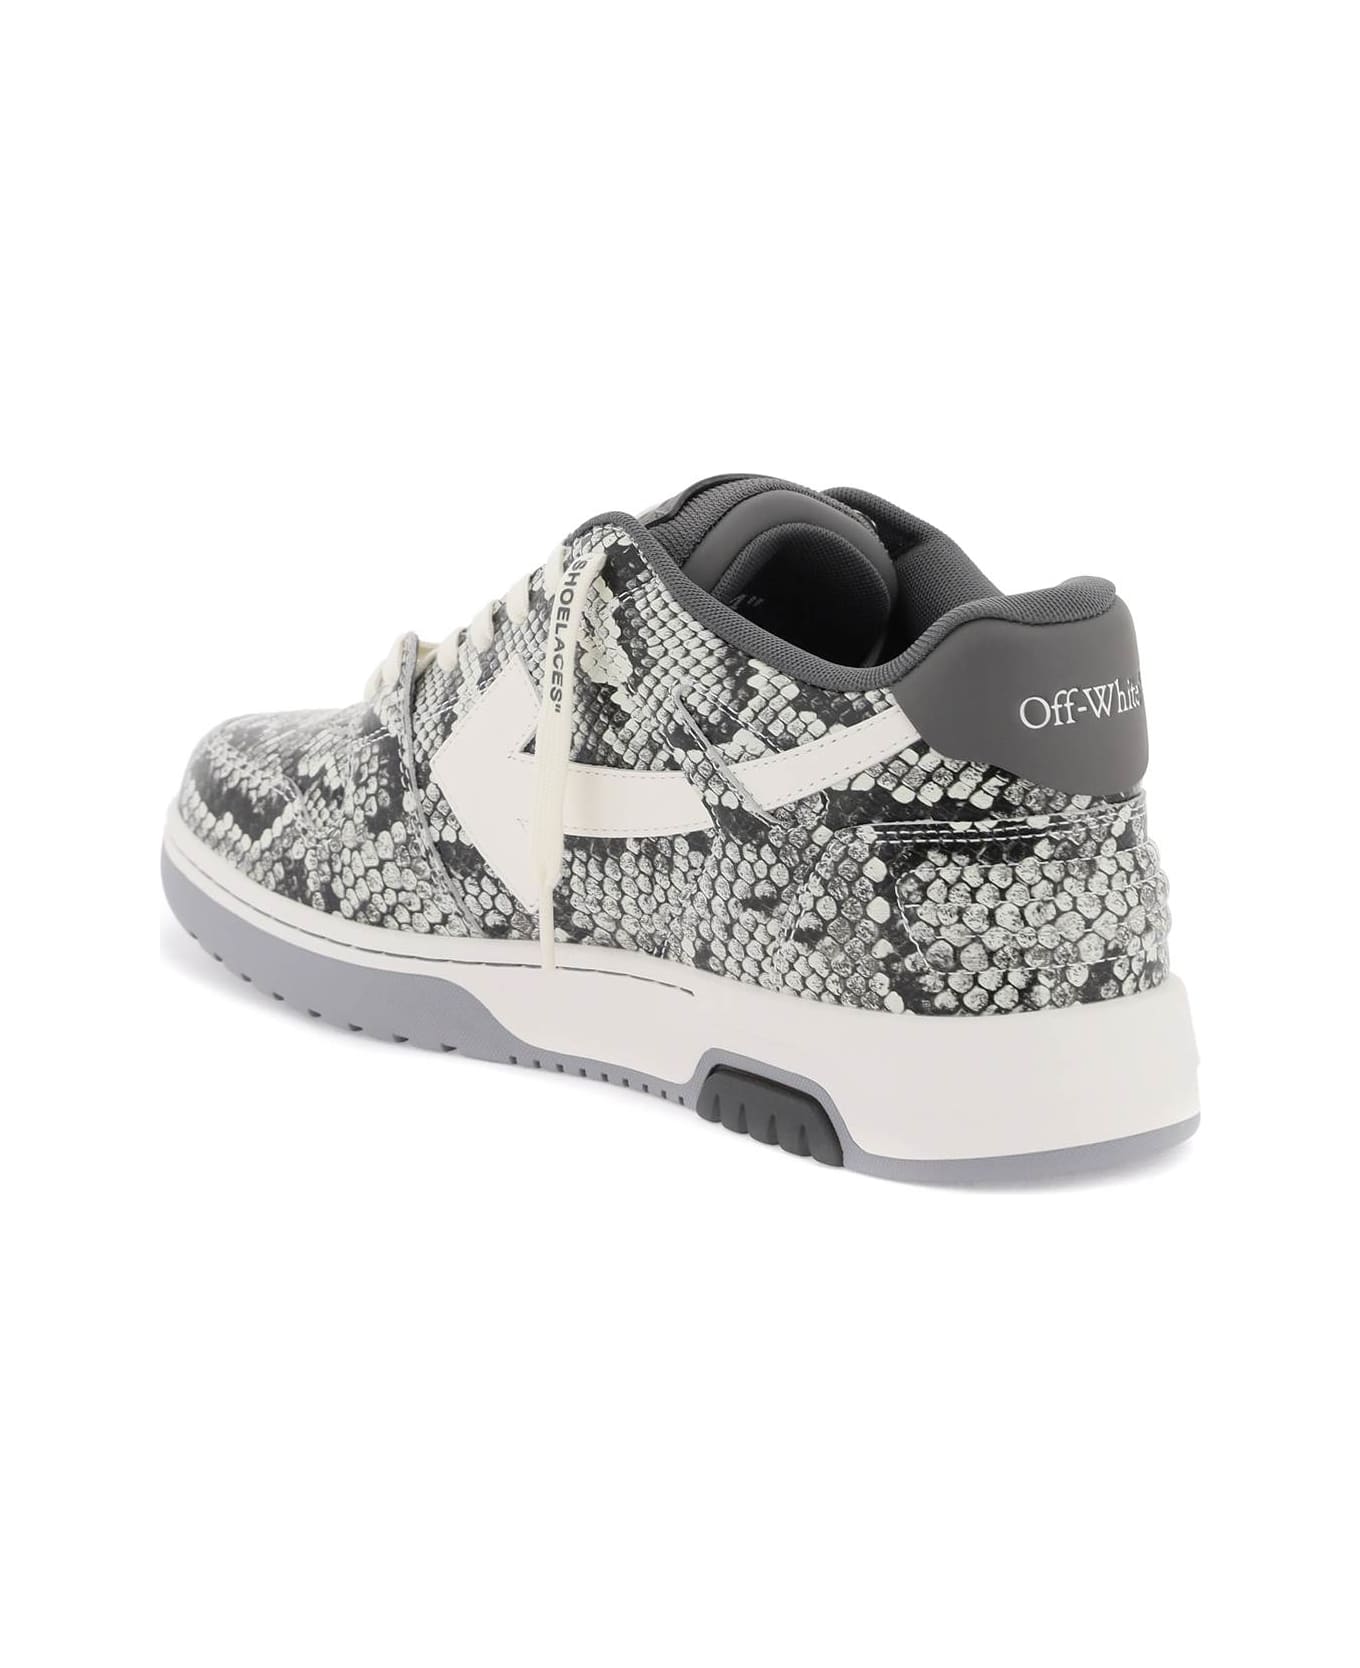 Off-White Out Of Office Sneakers - DARK GREY (White) スニーカー